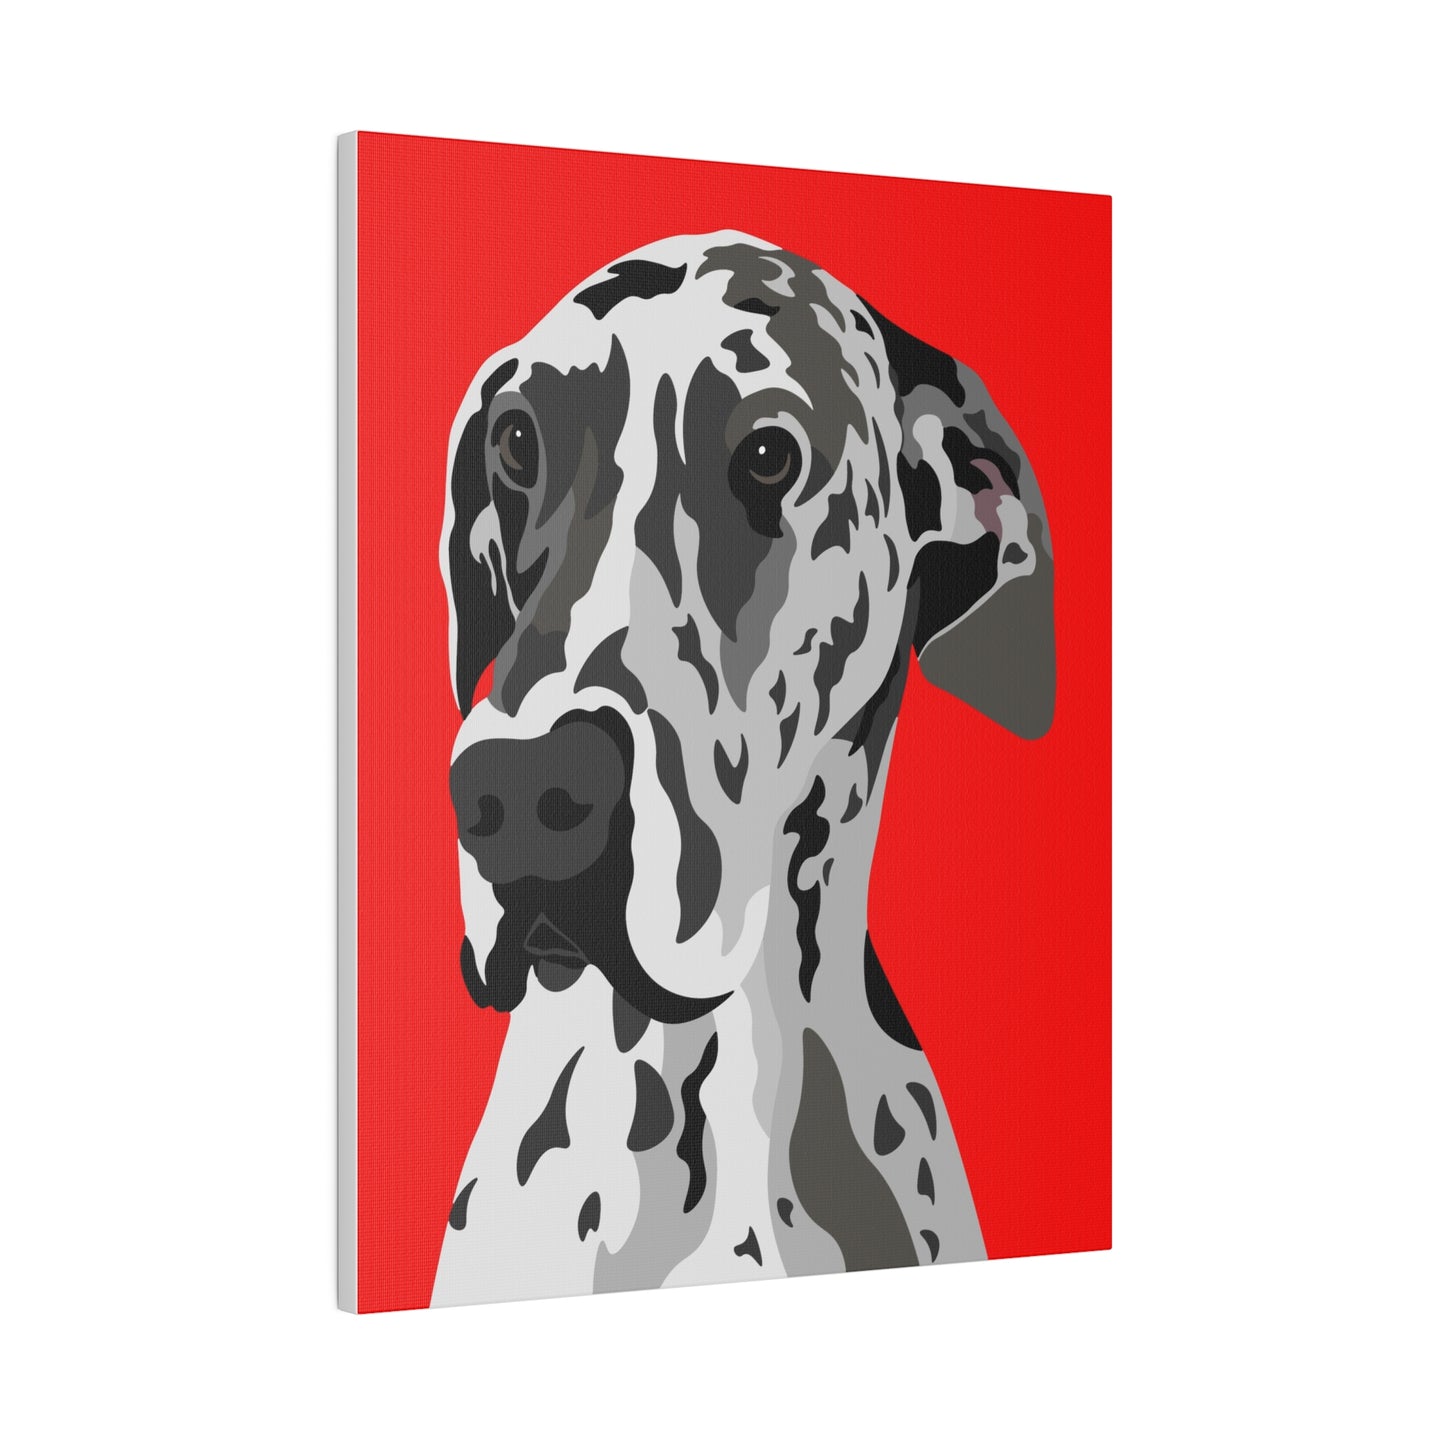 One Pet Portrait on Canvas | Red Background | Custom Hand-Drawn Pet Portrait in Cartoon-Realism Style